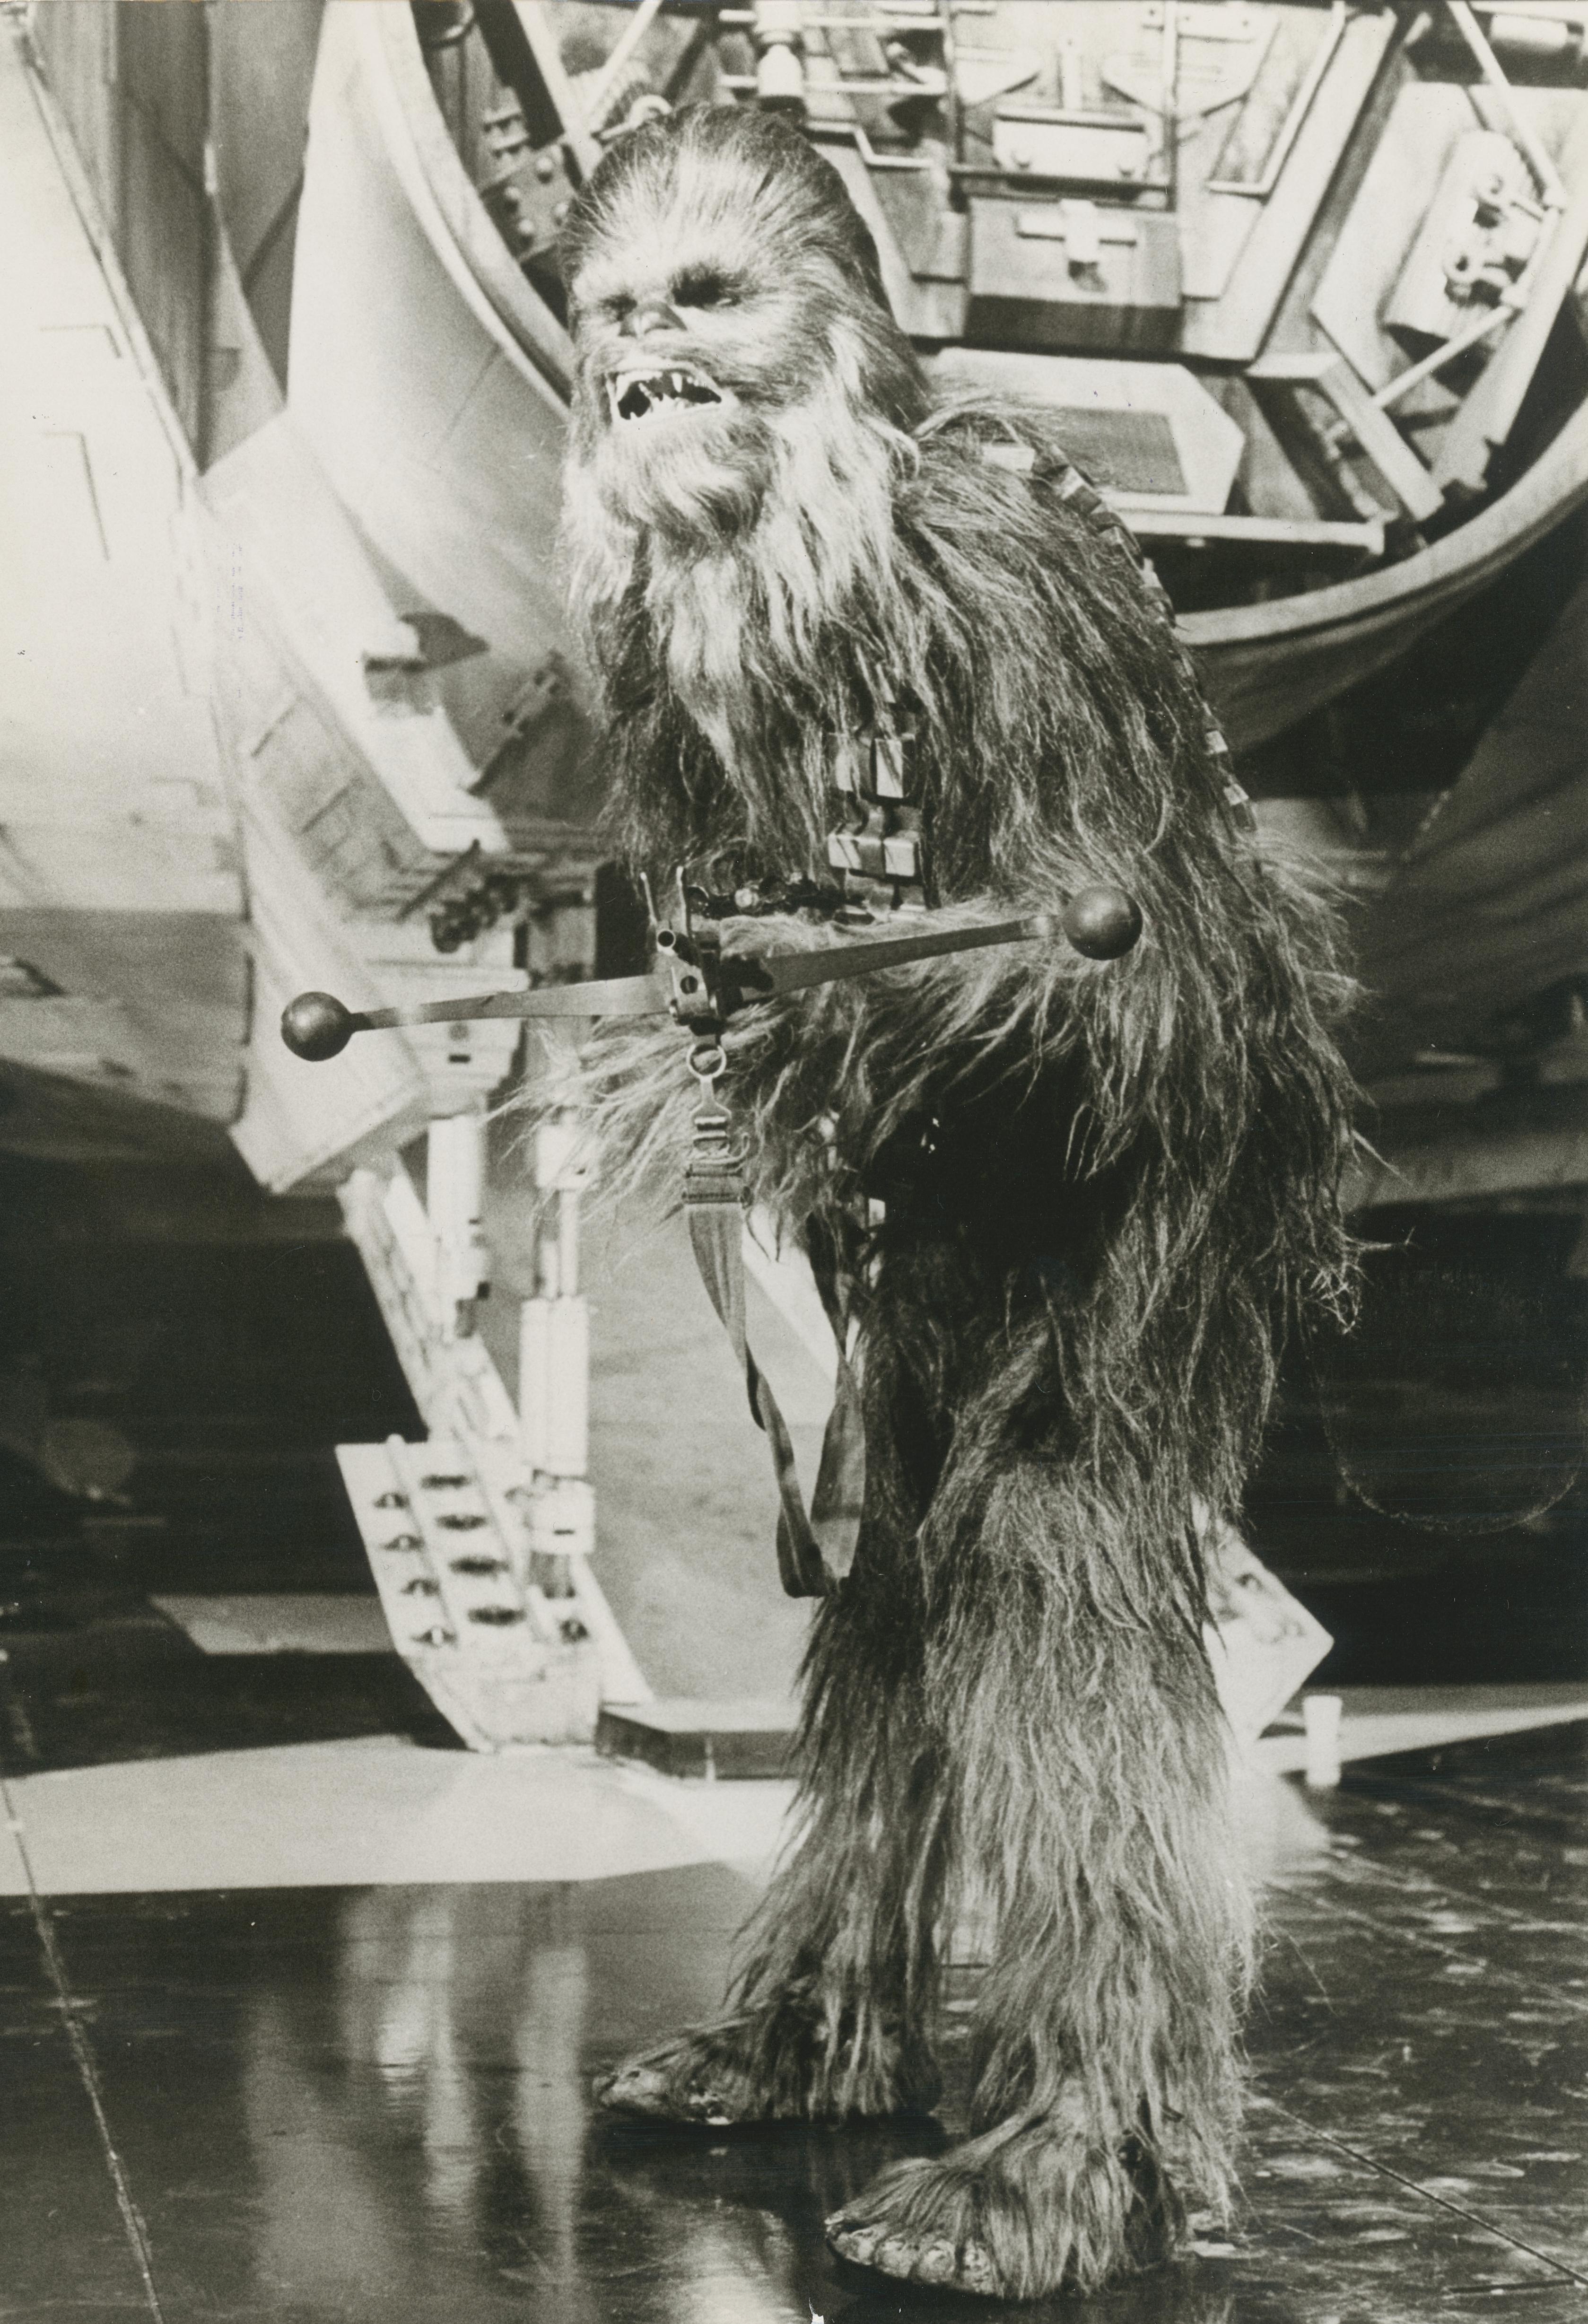 Unknown Black and White Photograph – Star Wars, Chewbacca, Sience Fiction Filmstill, 1977